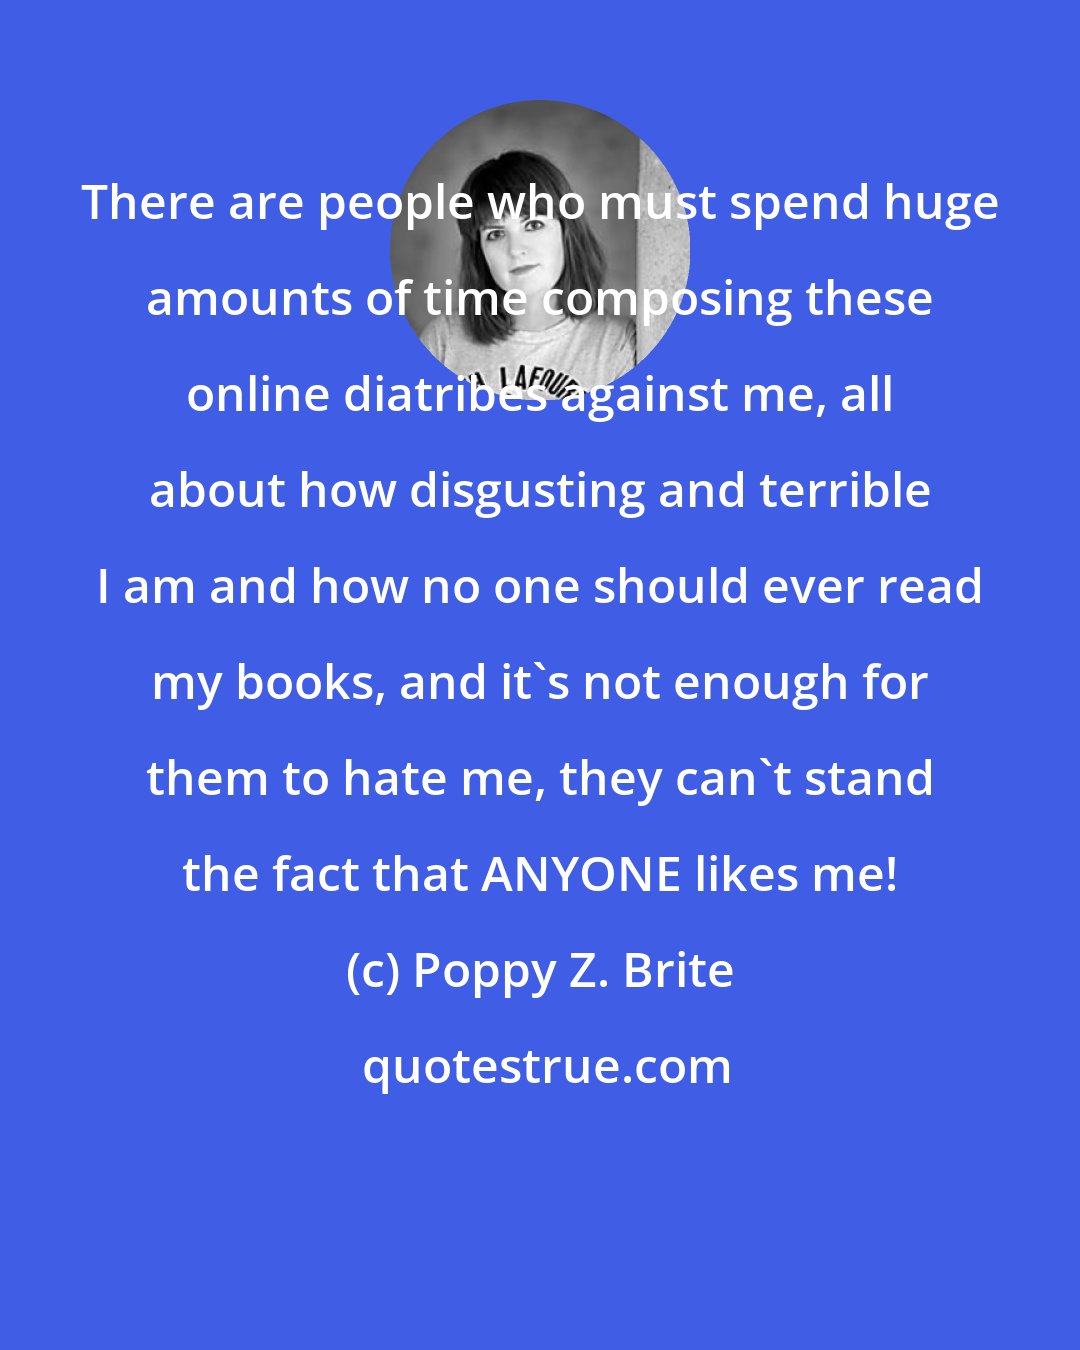 Poppy Z. Brite: There are people who must spend huge amounts of time composing these online diatribes against me, all about how disgusting and terrible I am and how no one should ever read my books, and it's not enough for them to hate me, they can't stand the fact that ANYONE likes me!